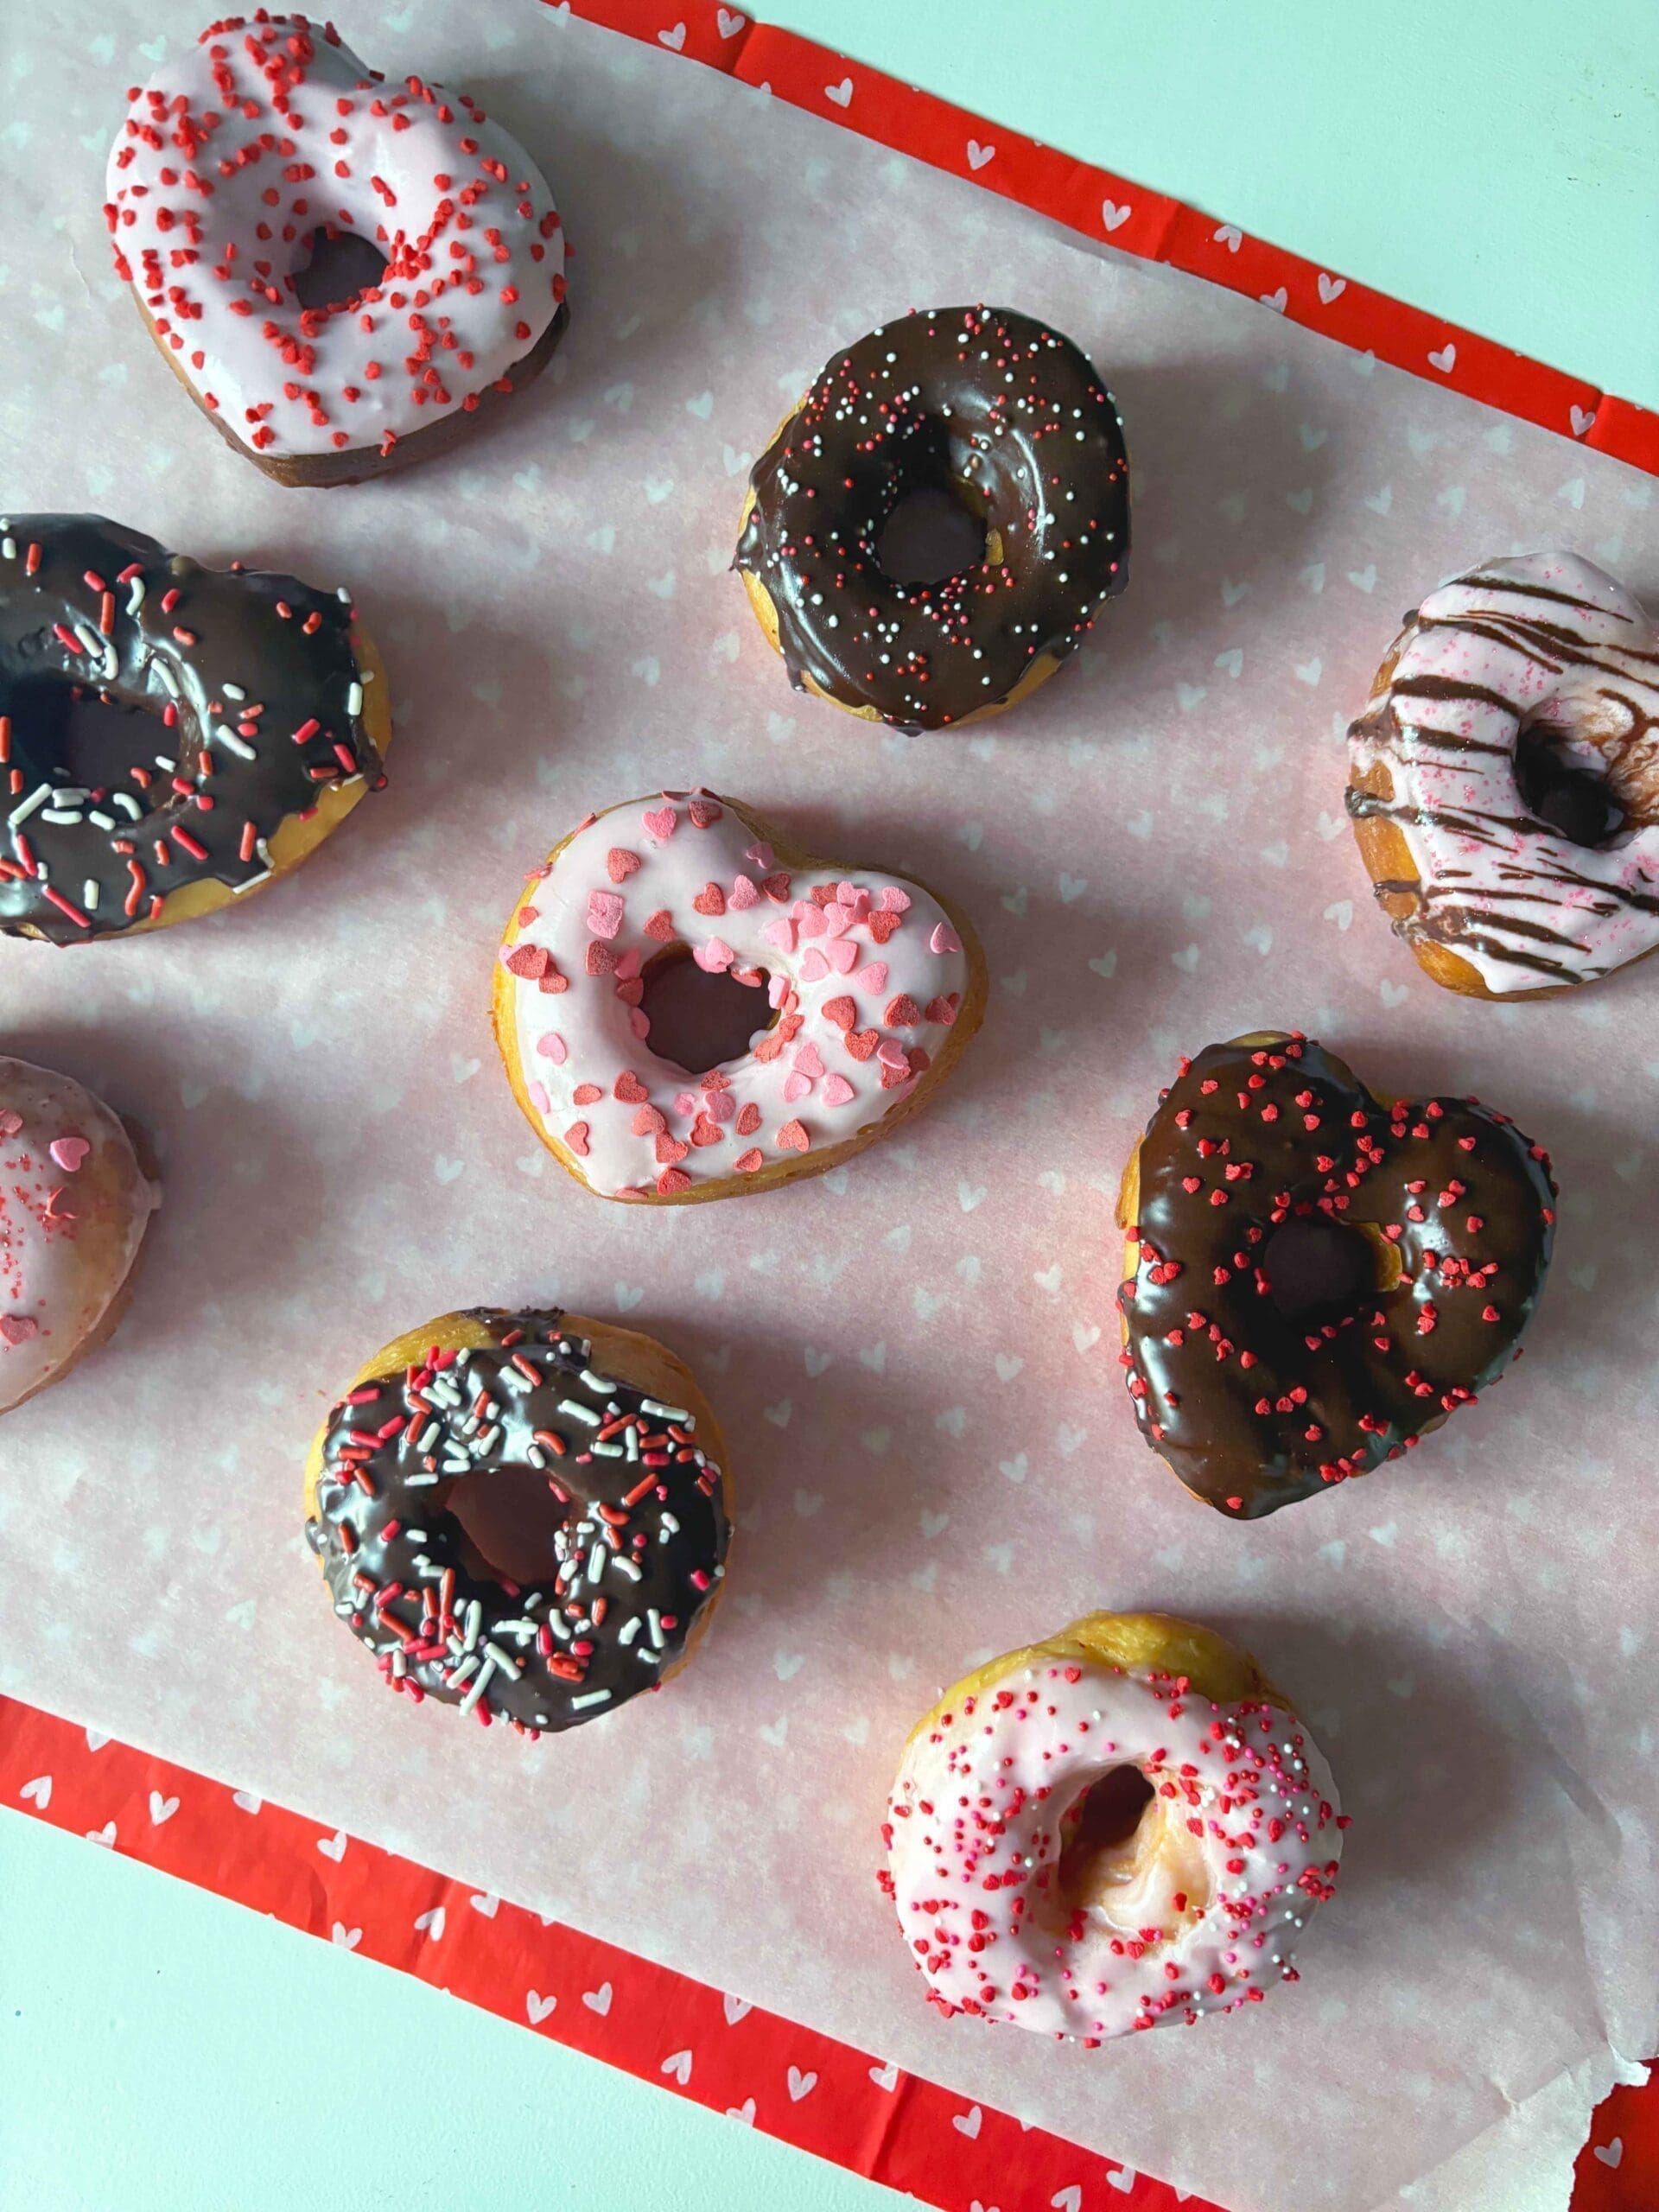 Love at First Bite: Irresistible Heart-Shaped Donuts for Valentine’s Day